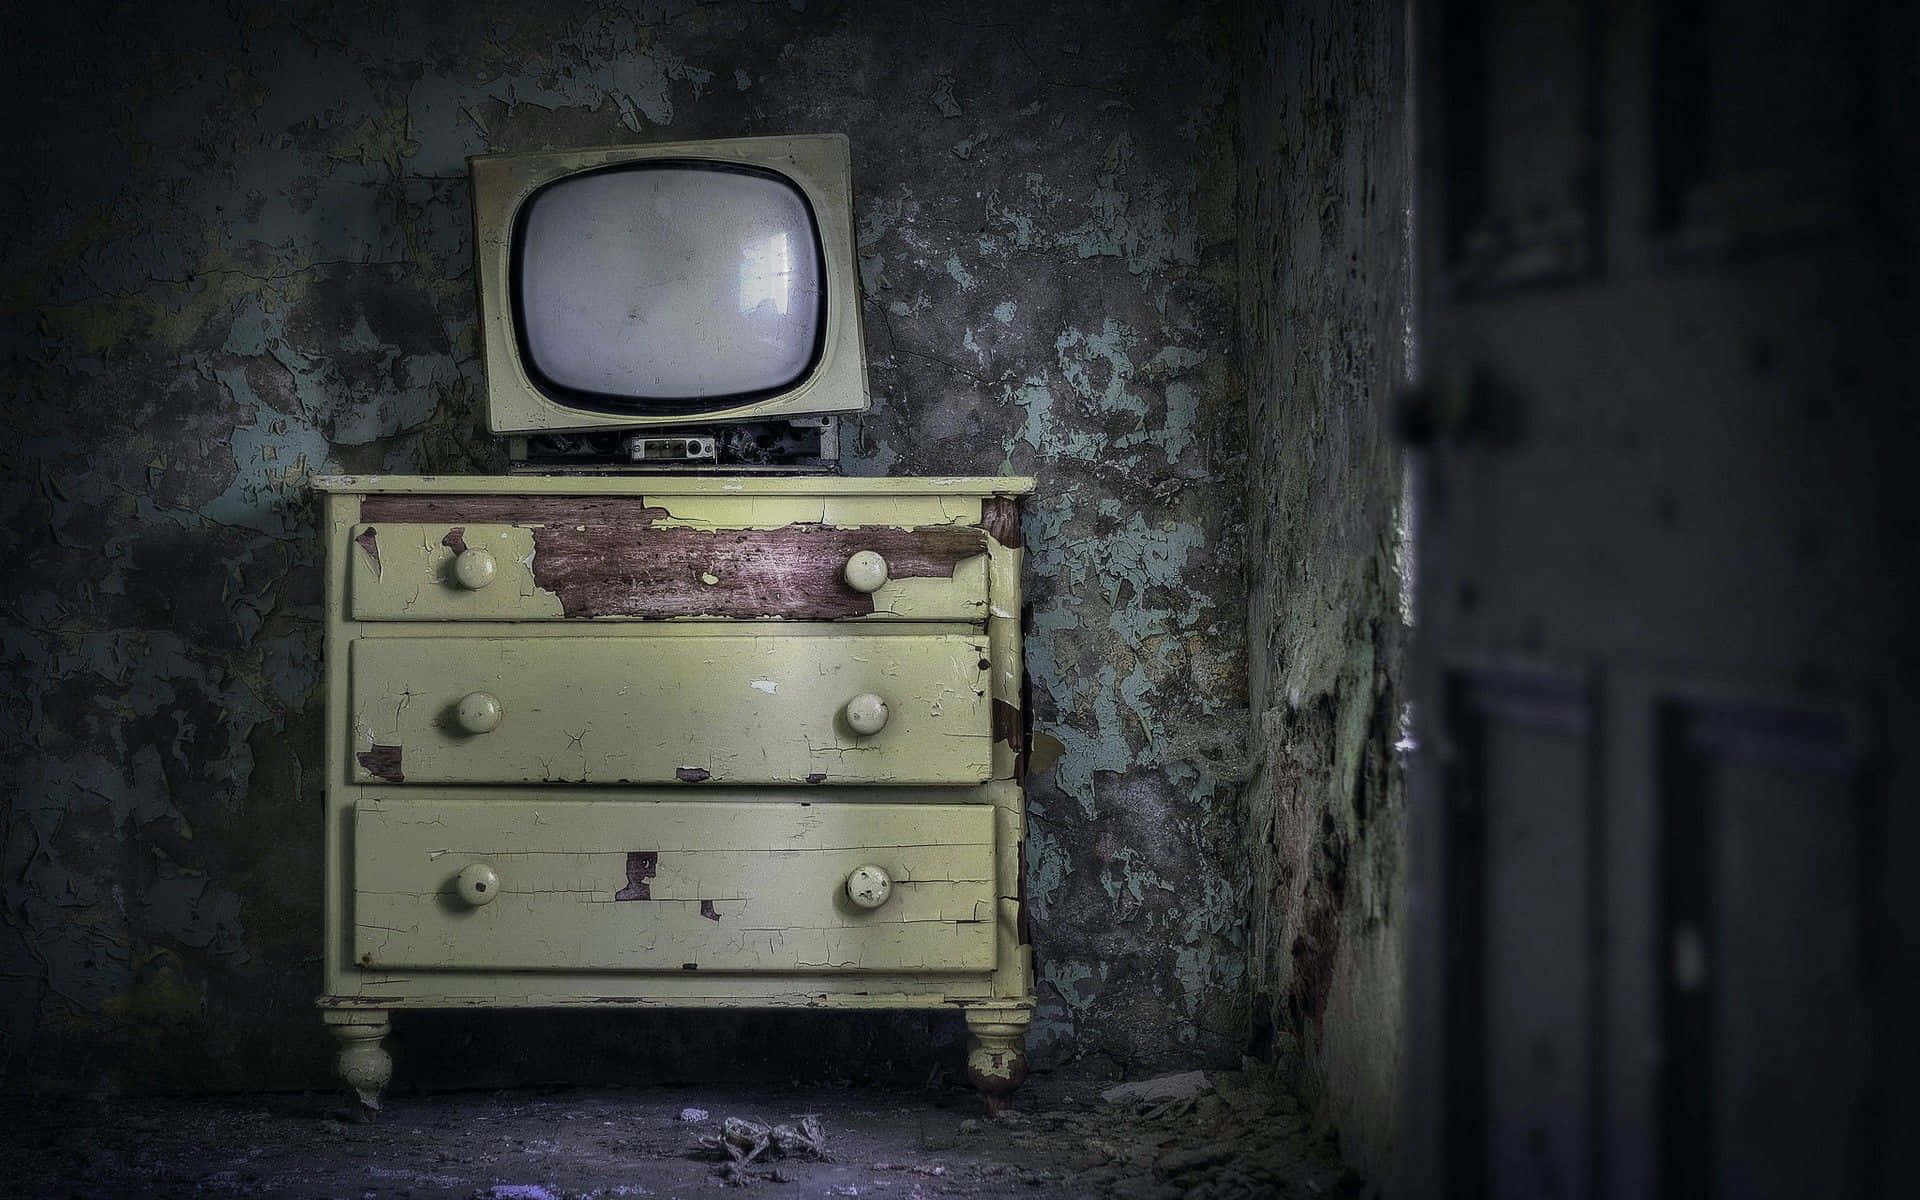 An Old Tv In An Abandoned Room